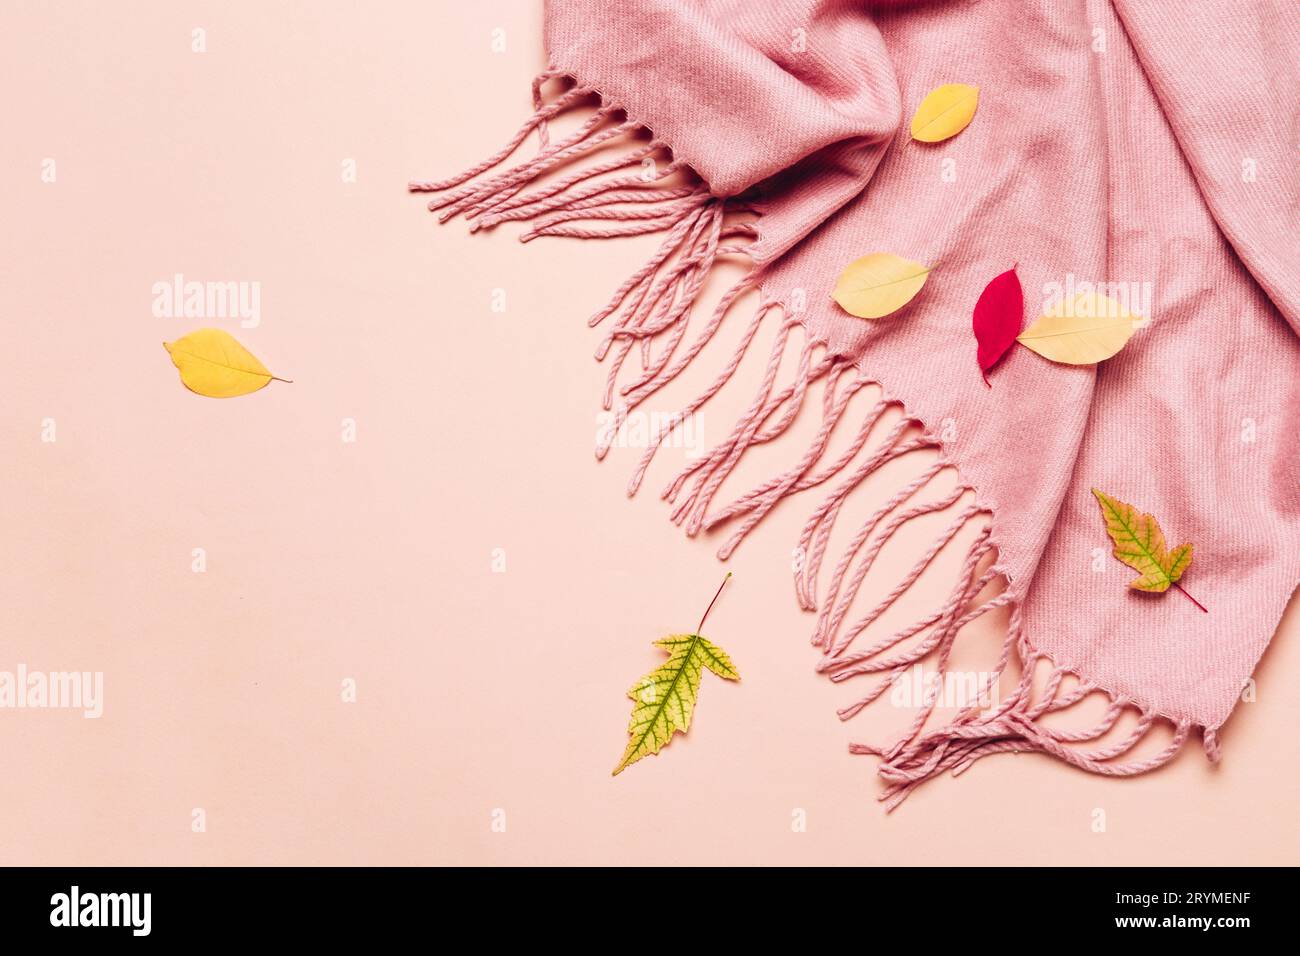 Pink cozy scarf with tassels and scattered leaves on pastel background. Hello autumn concept Stock Photo